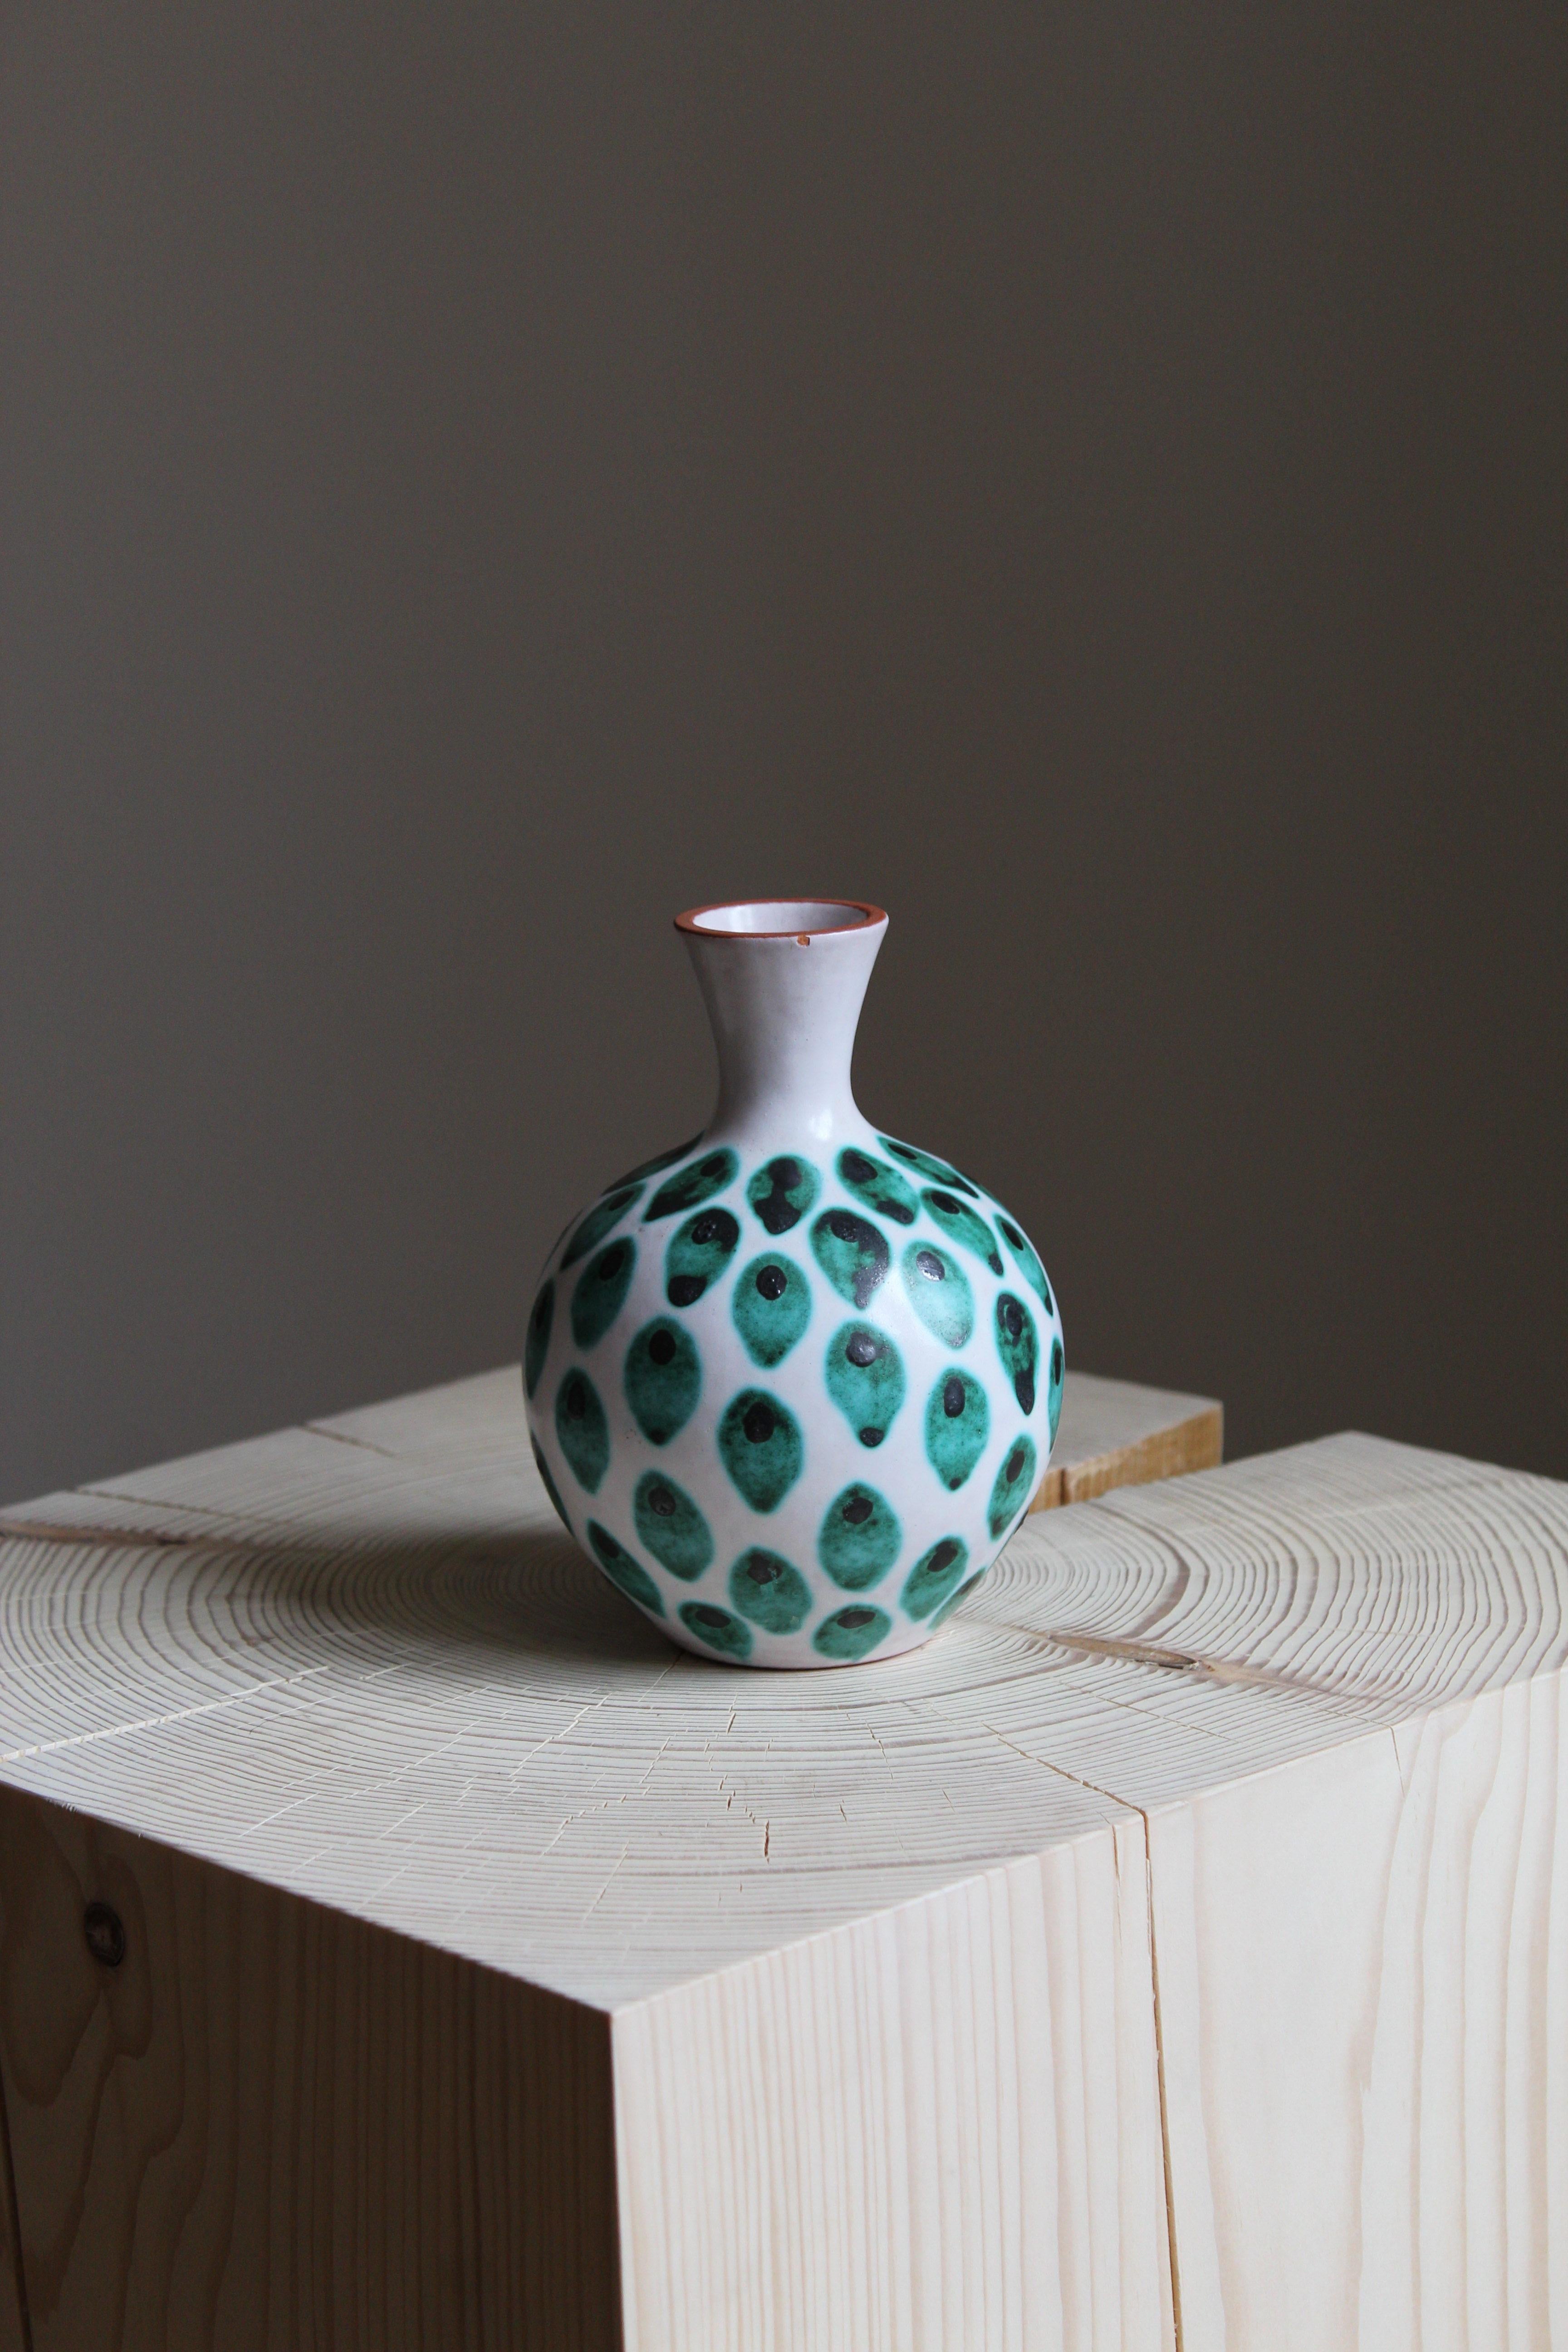 A small vase. Designed by Stig Lindberg, 1950s. Produced by Gustavsberg.